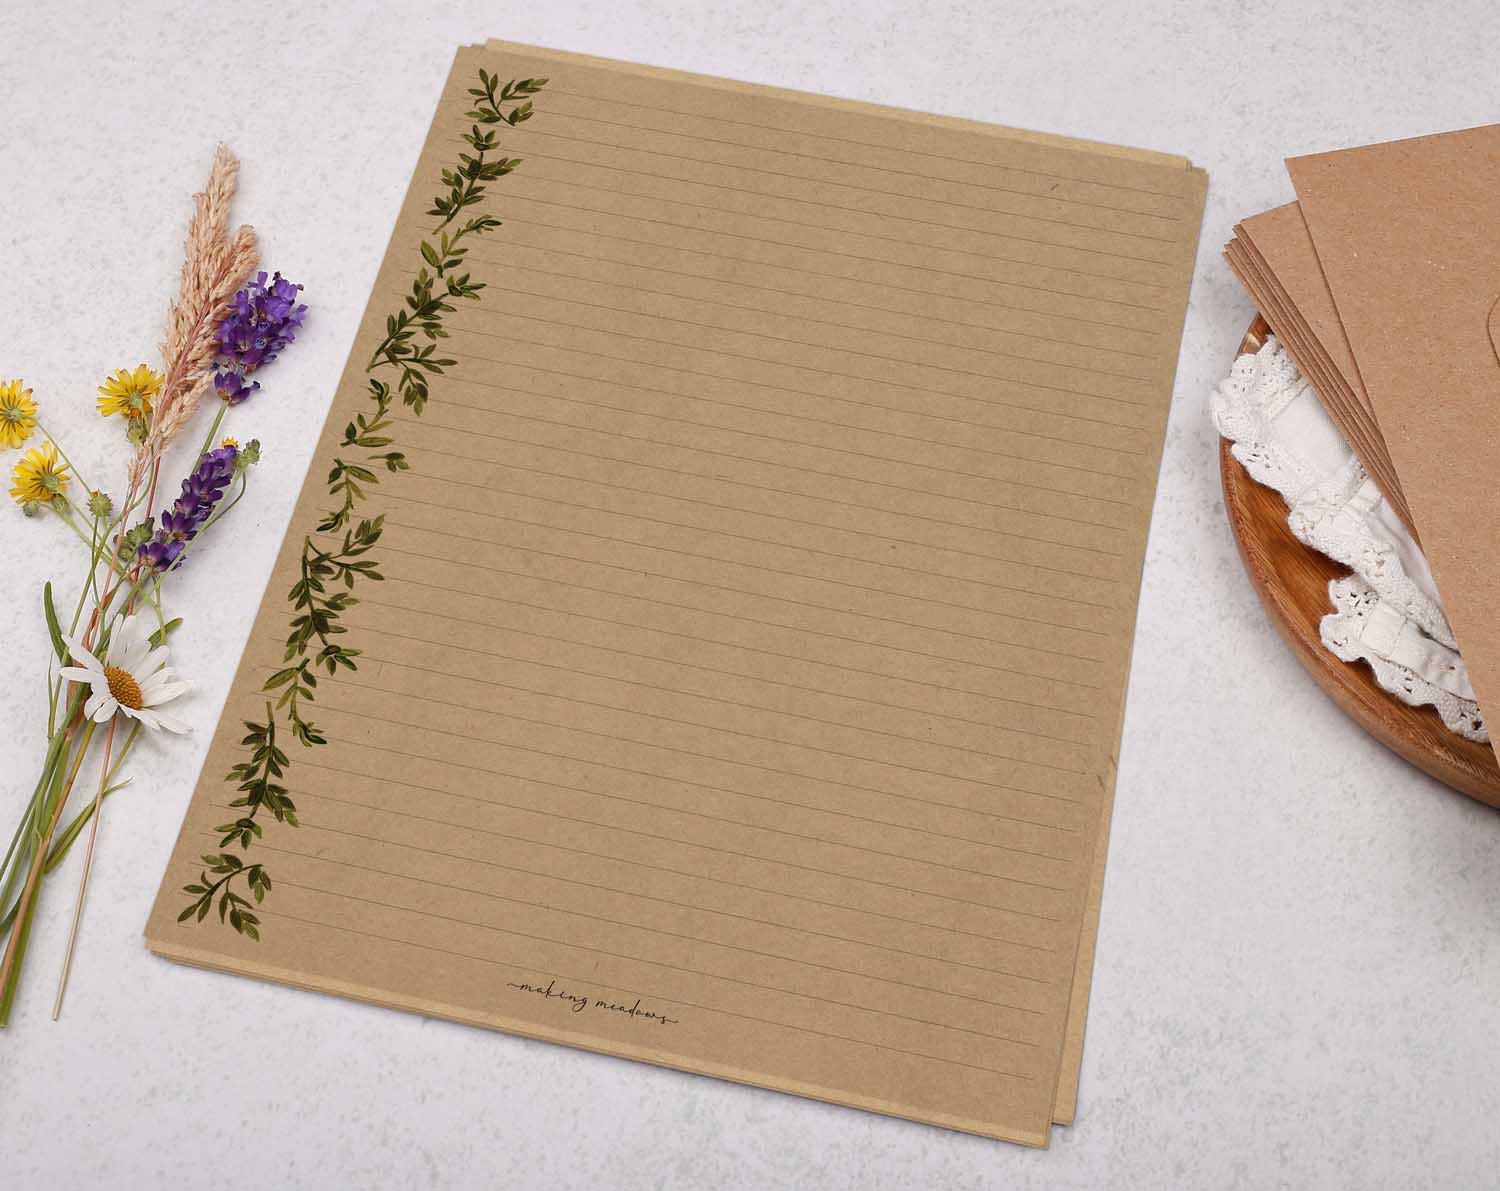 A4 Kraft Letter Writing Paper Sheets with a Green Watercolour Botanical Leaf Border design.